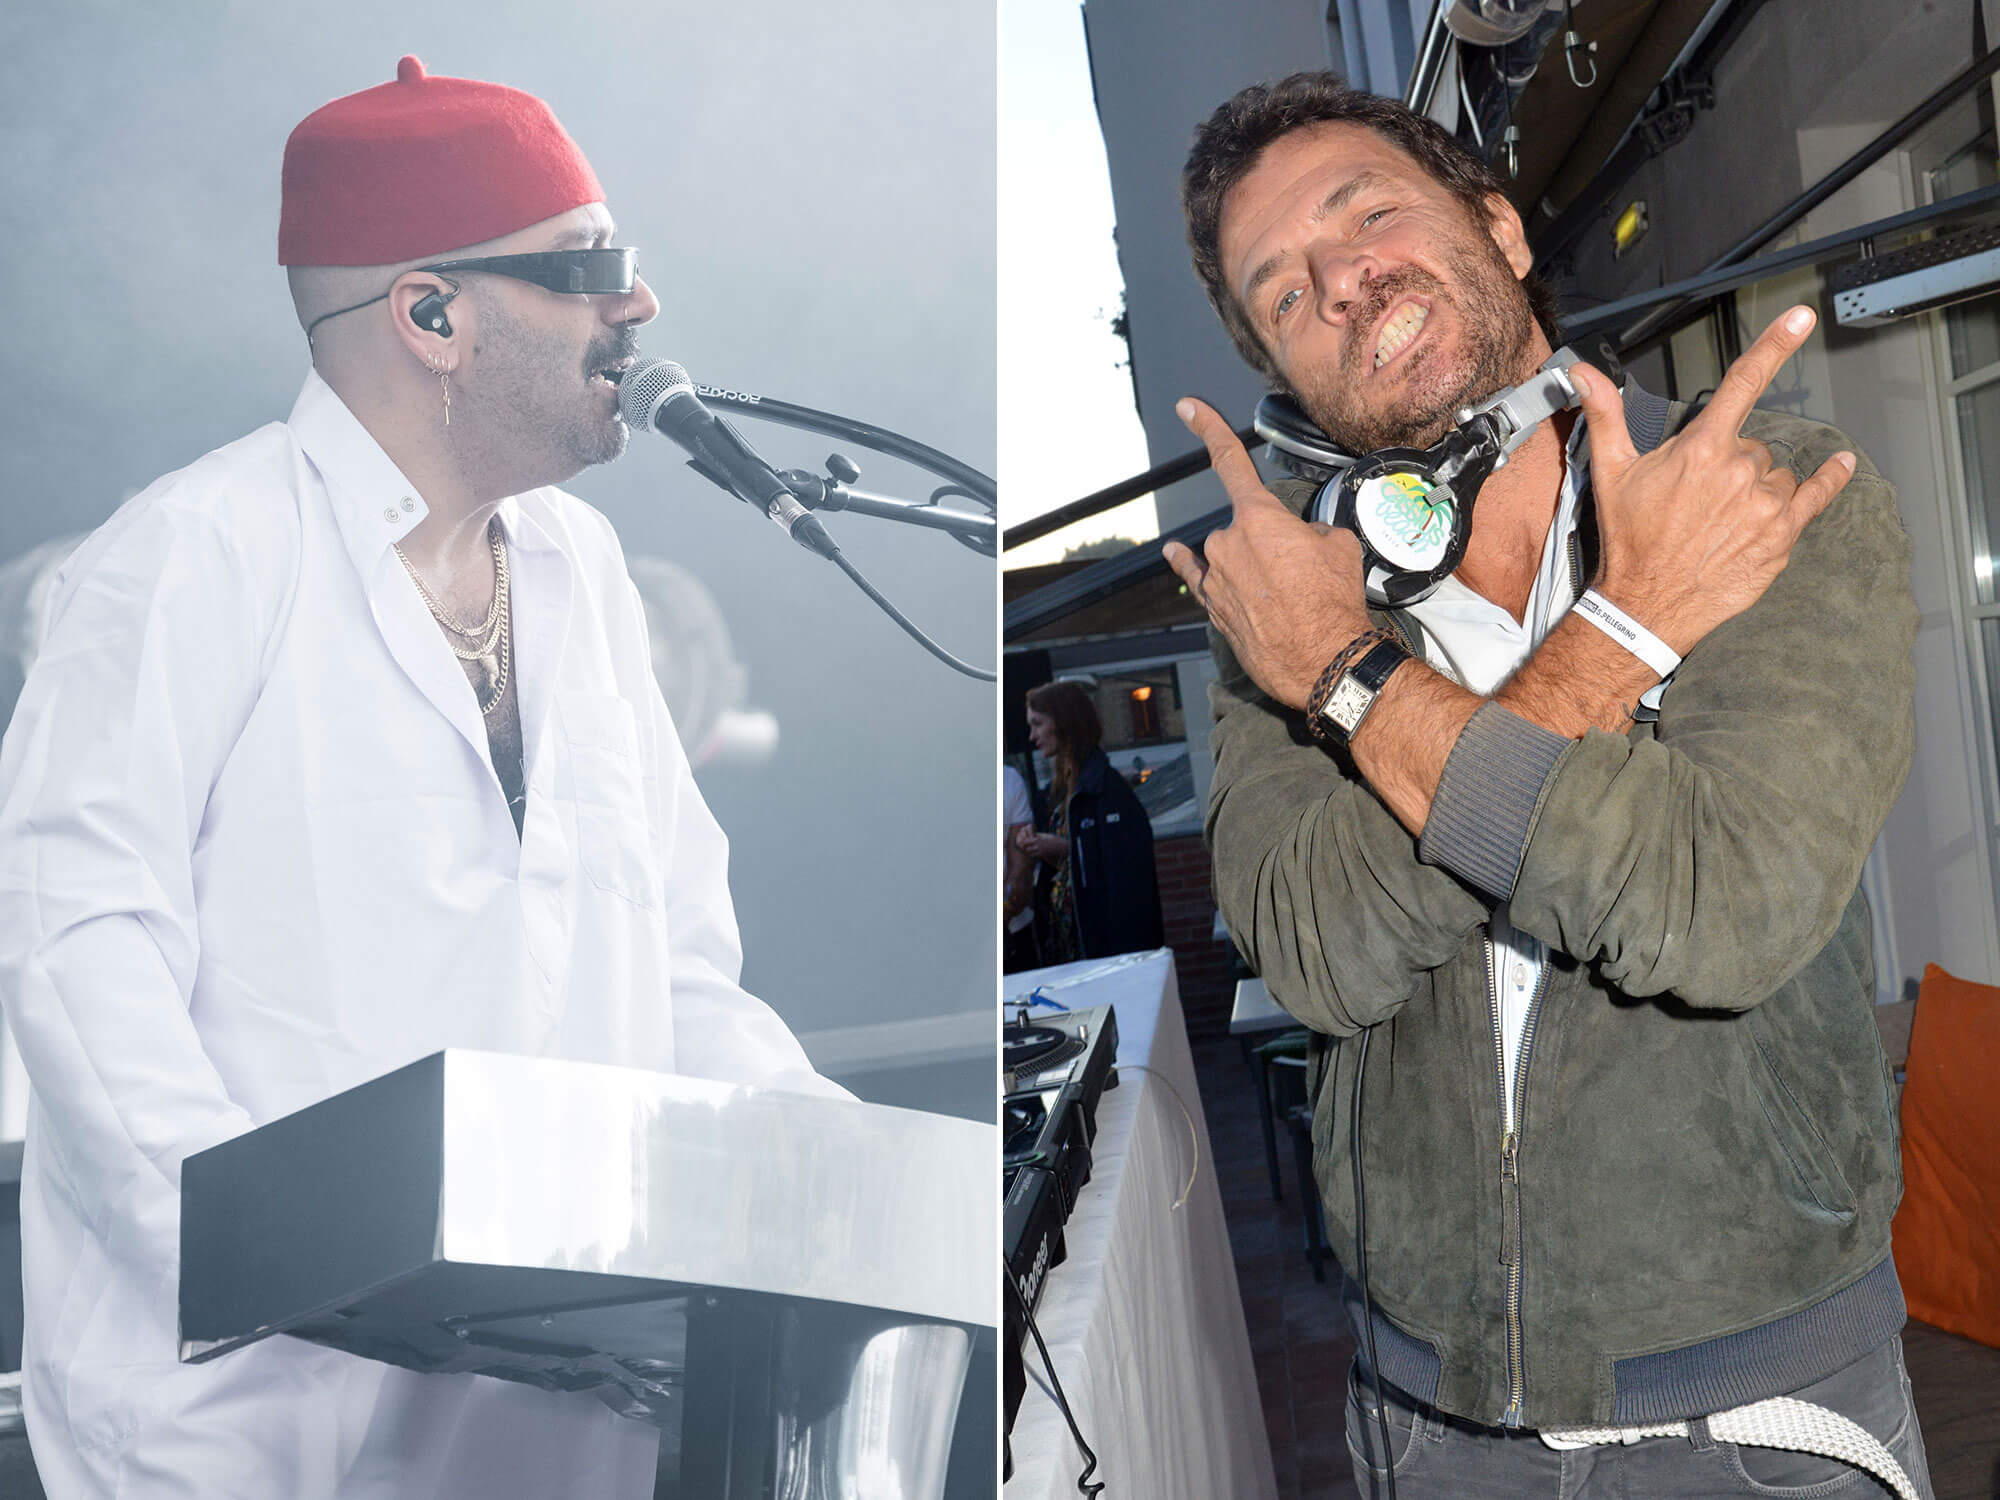 [L-R] P-Thugg of Chromeo and Philippe Zdar